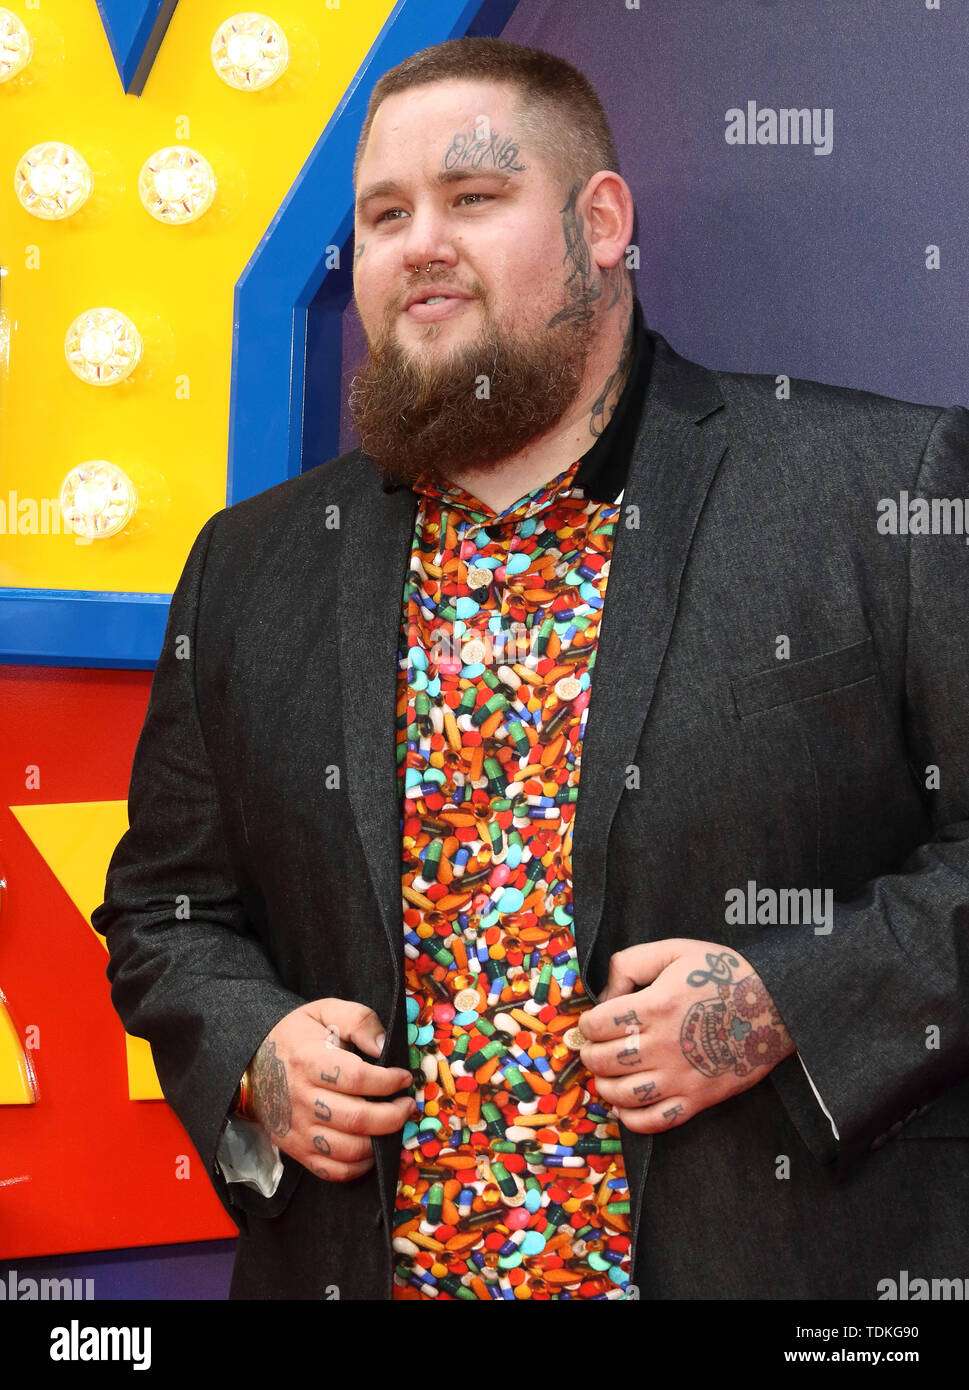 London, UK. 16th June, 2019. Rag n Bone Man attends the European Premiere of Toy Story 4 at Odeon Luxe, Leicester Square in London. Credit: SOPA Images Limited/Alamy Live News Stock Photo